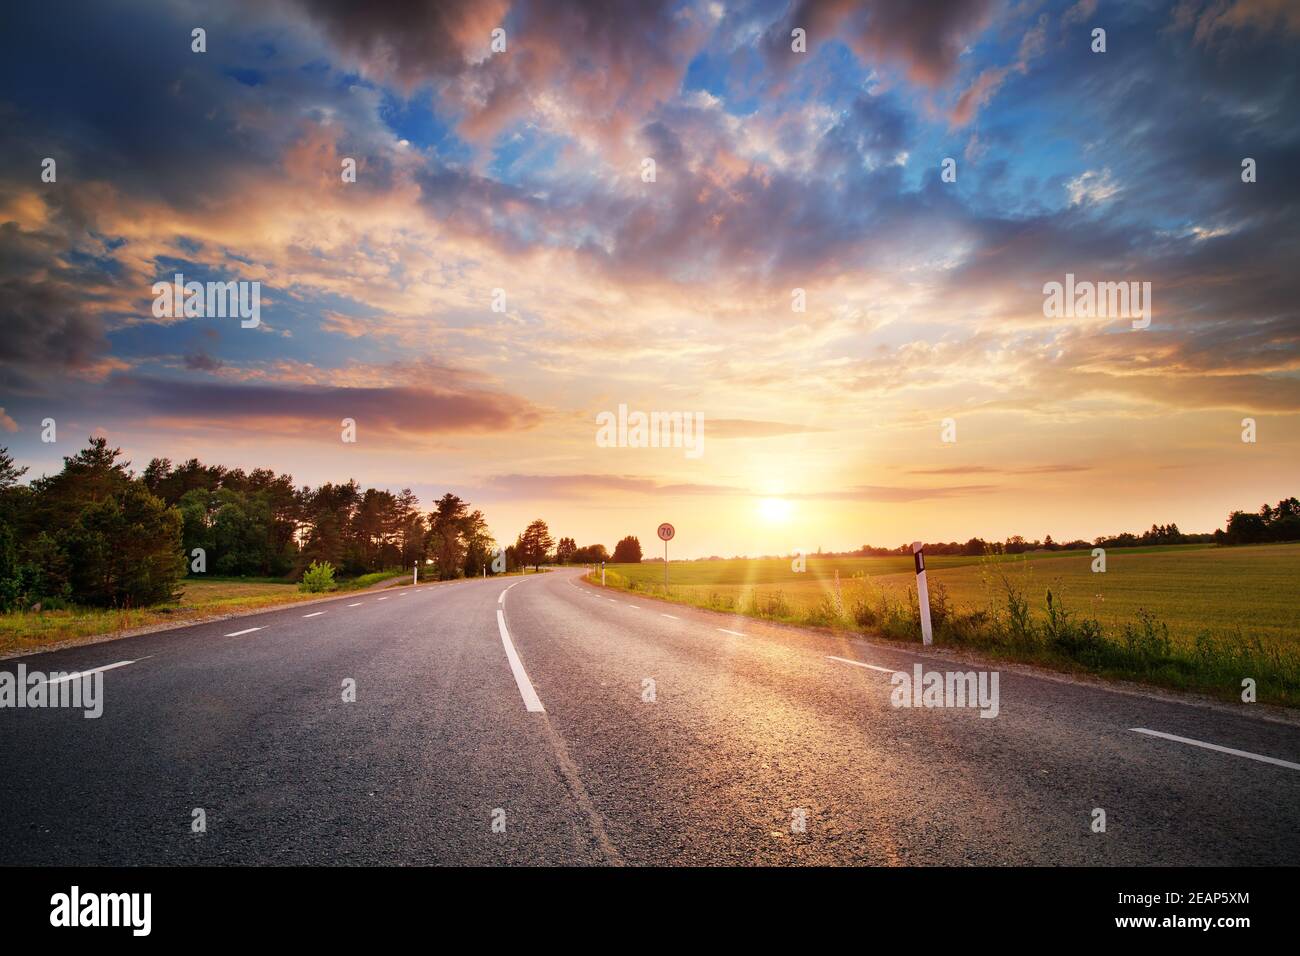 Asphalt road and dividing lines at sunset Stock Photo